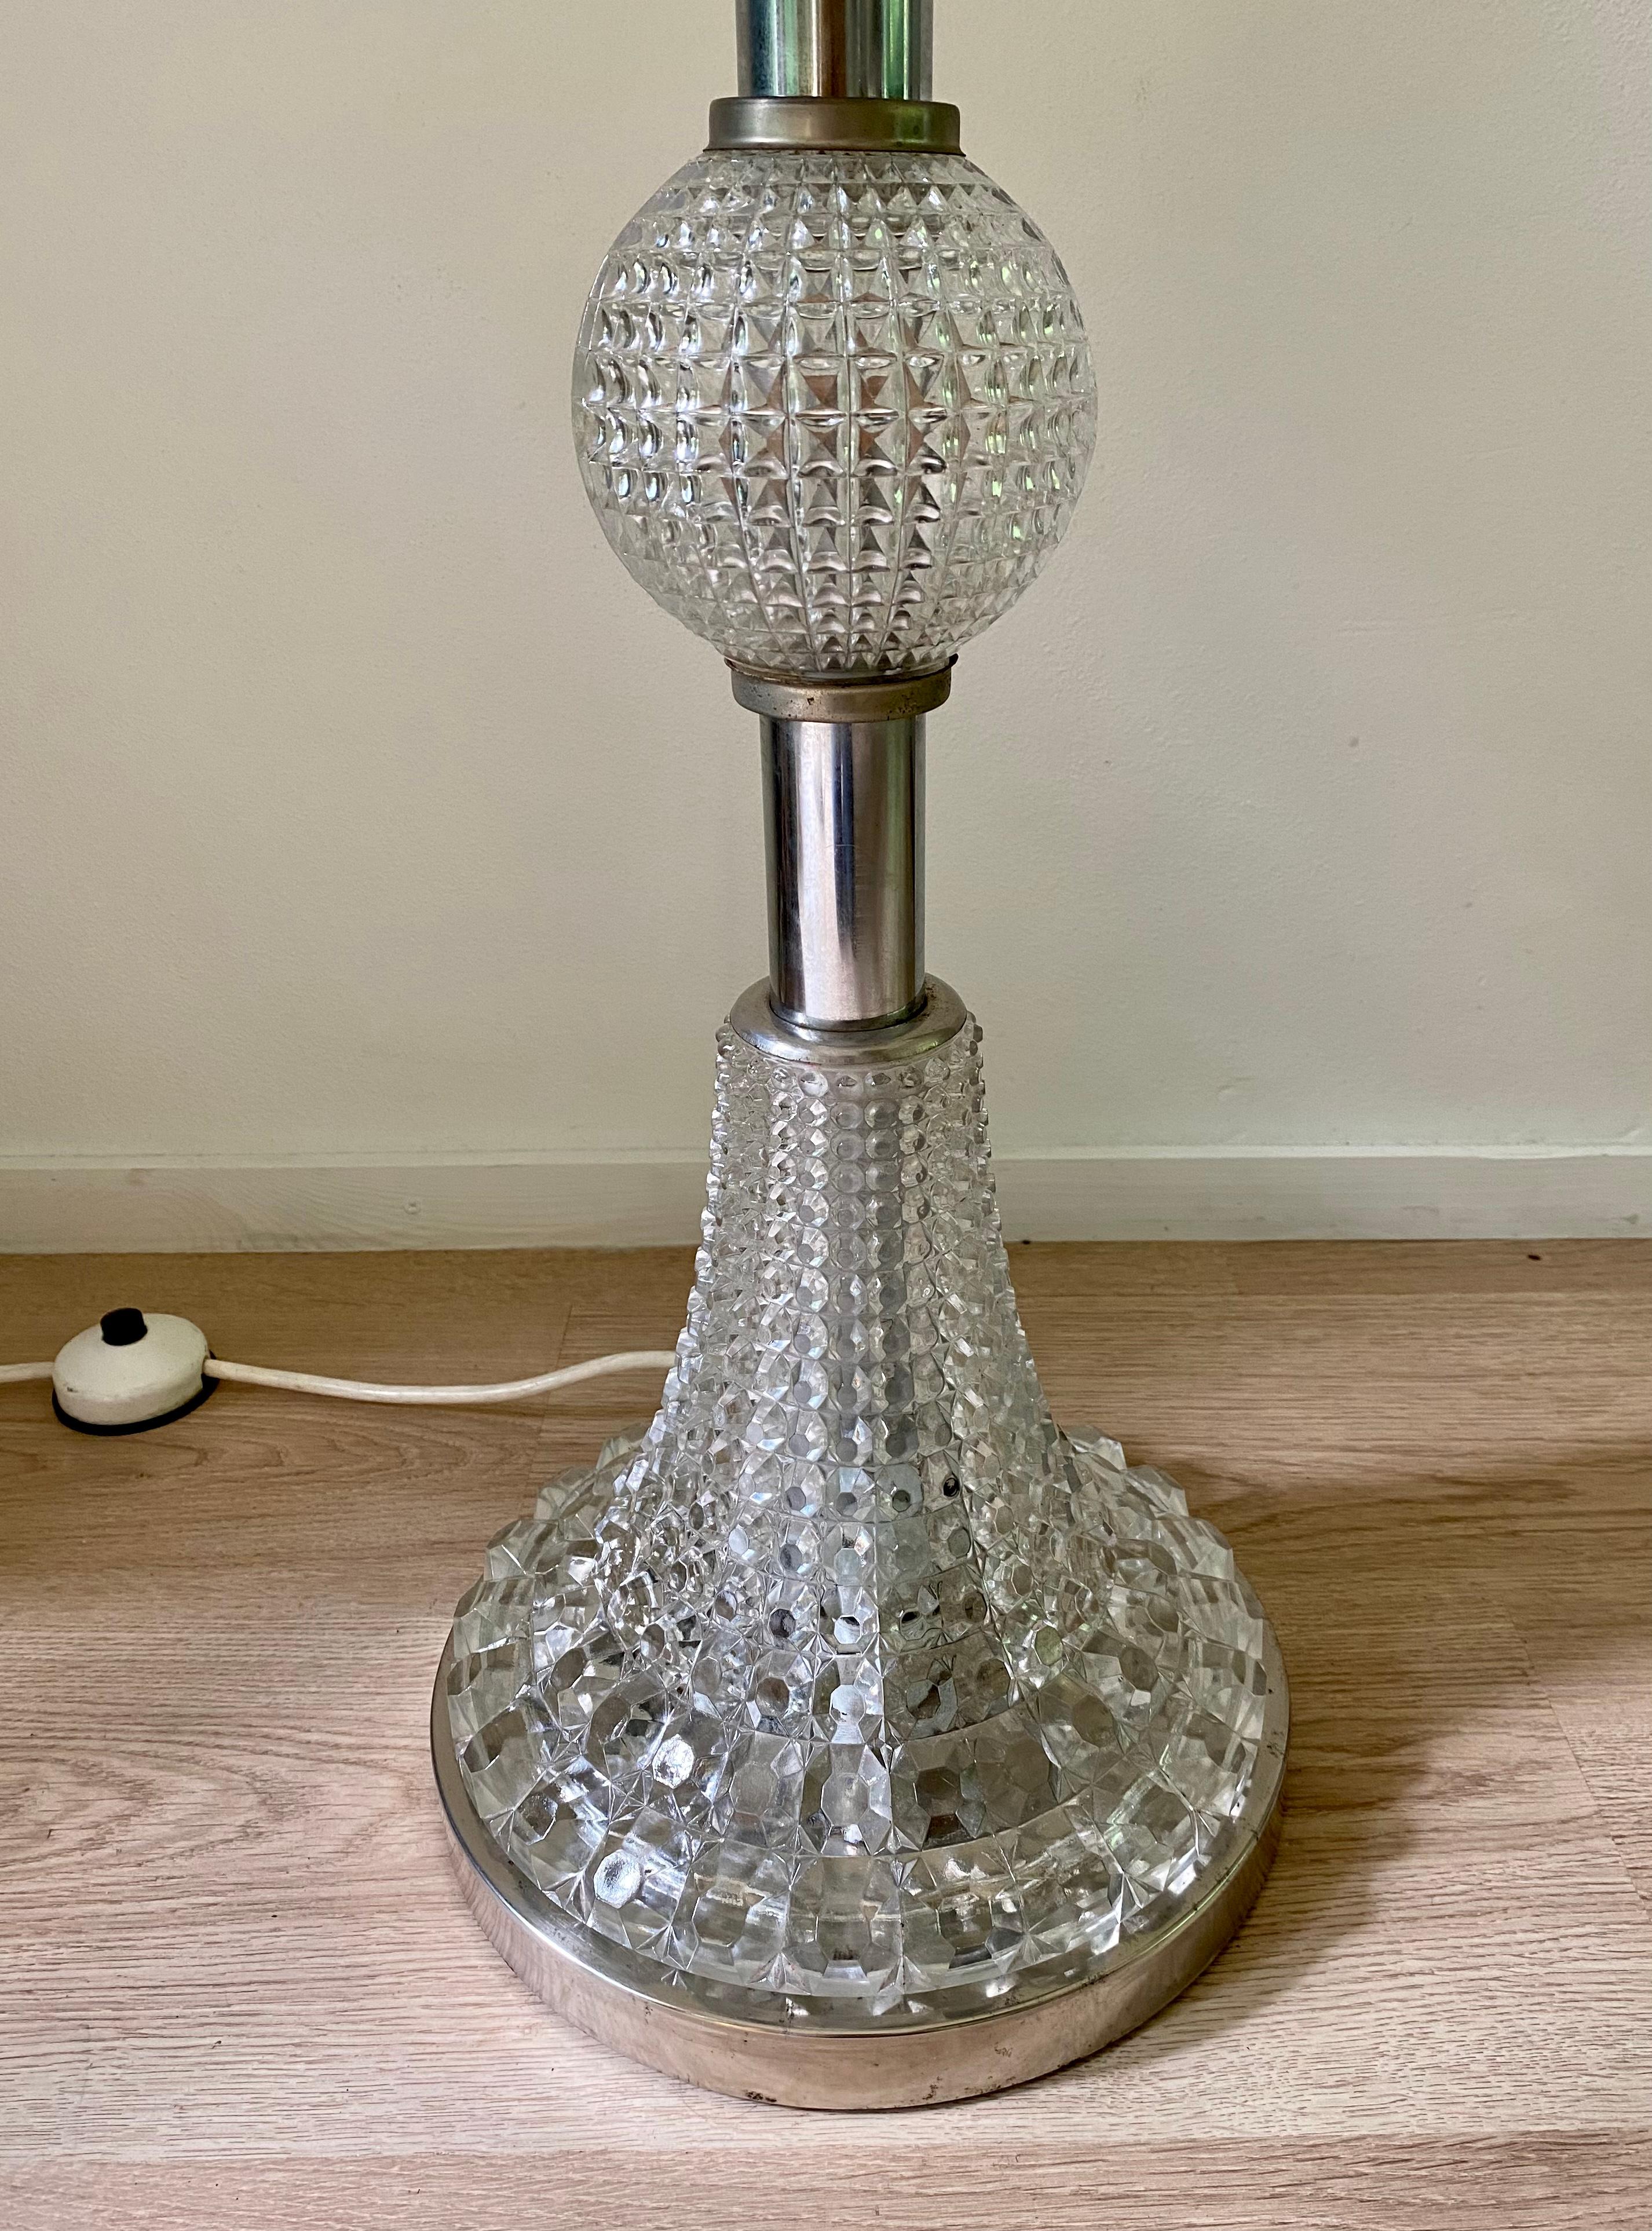 Wonderful European Lamp foot consisting of cut glass and Chrome. The lights inside can be switched on and off together or separately. Absolute stunning piece which is still in good condition for it’s age.